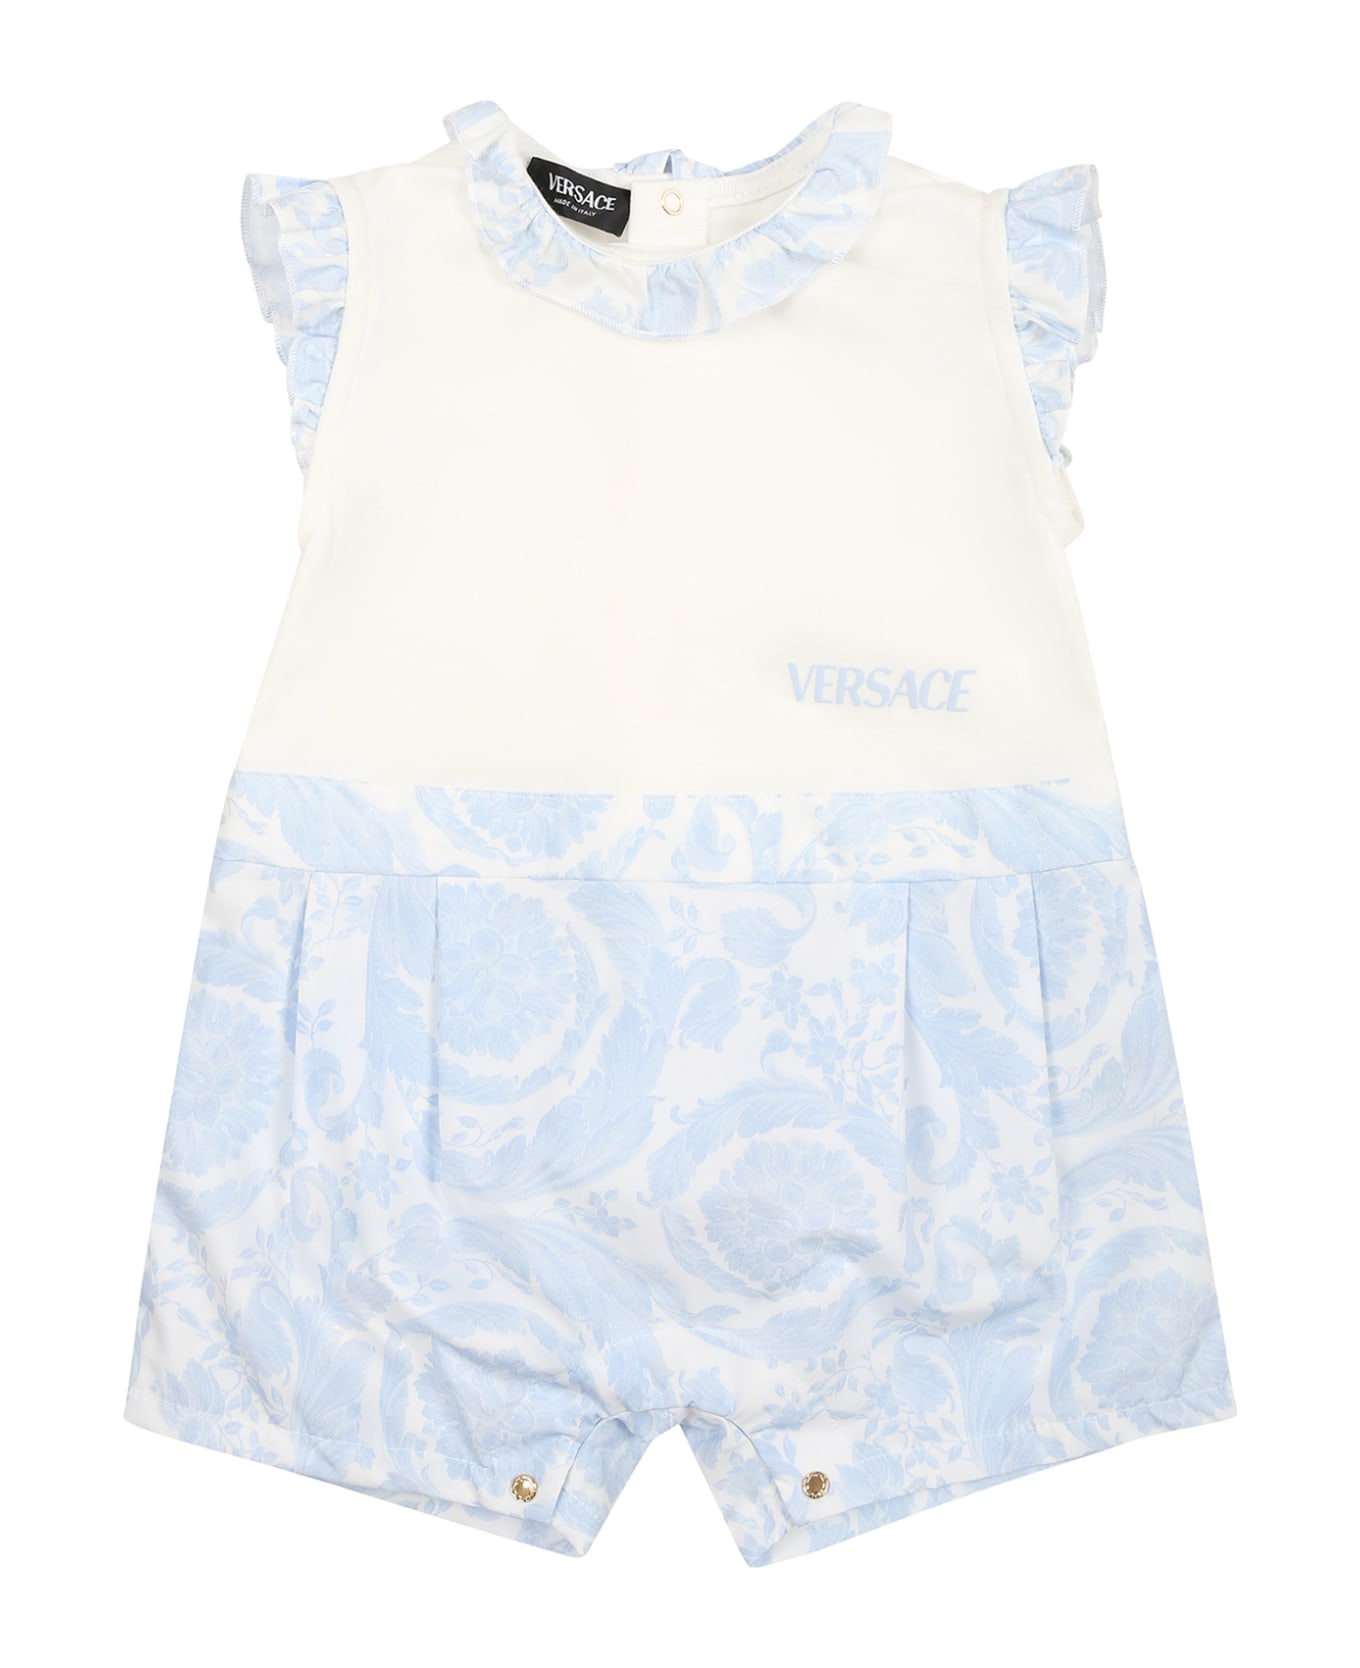 Versace Light Blue Romper For Babies With Baroque Print - Light Blue